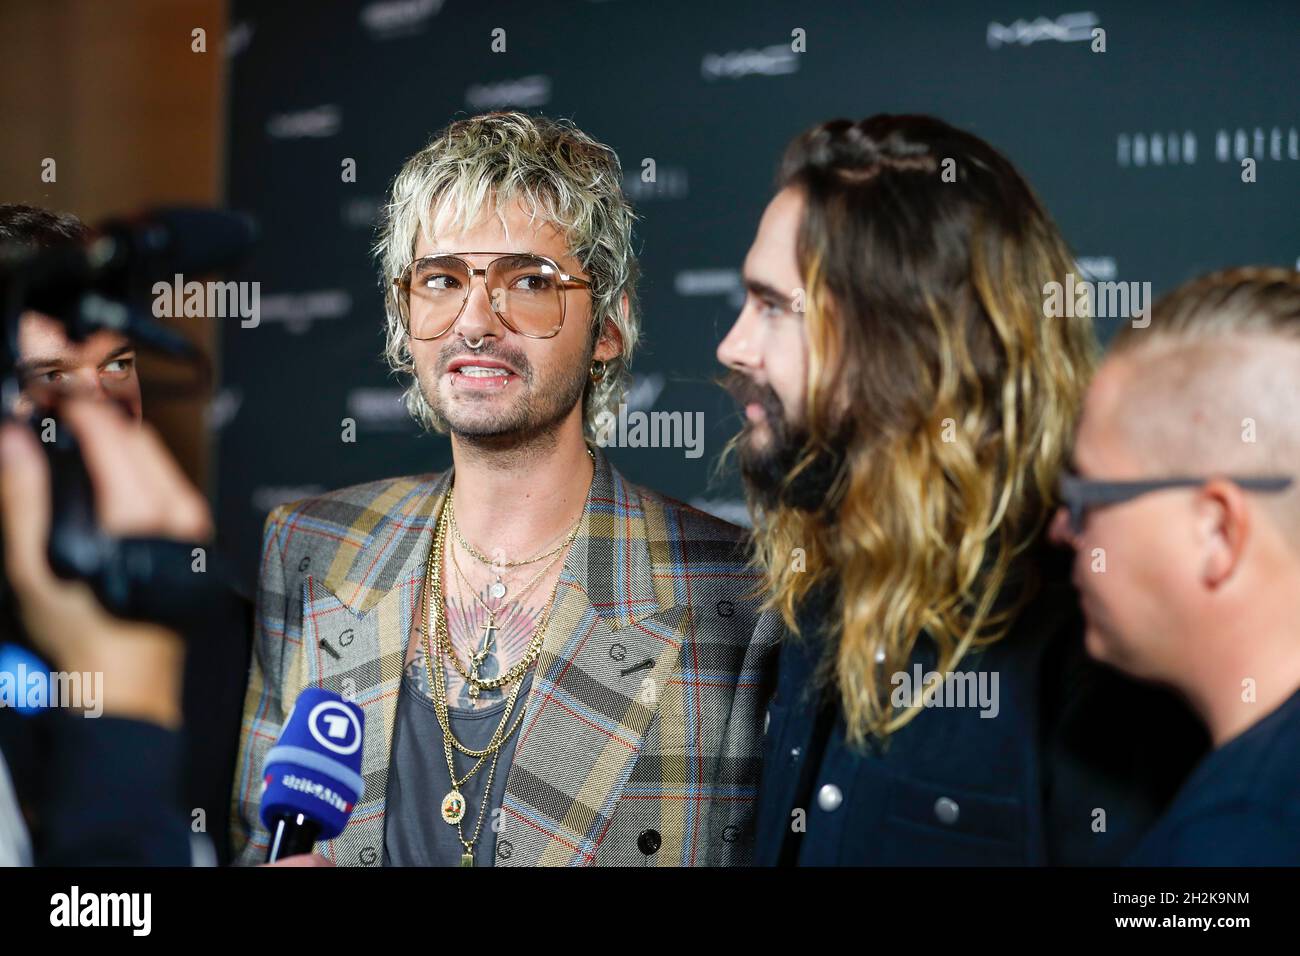 Berlin, Germany. 22nd Oct, 2021. Tom Kaulitz (l) and brother Bill Kaulitz answer questions from journalists at the Tokio Hotel event in Berlin. On Friday Tokio Hotel will release the new single 'Here comes The Night' and at the same time this will be celebrated with an award ceremony in Berlin. Credit: Gerald Matzka/dpa/Alamy Live News Stock Photo